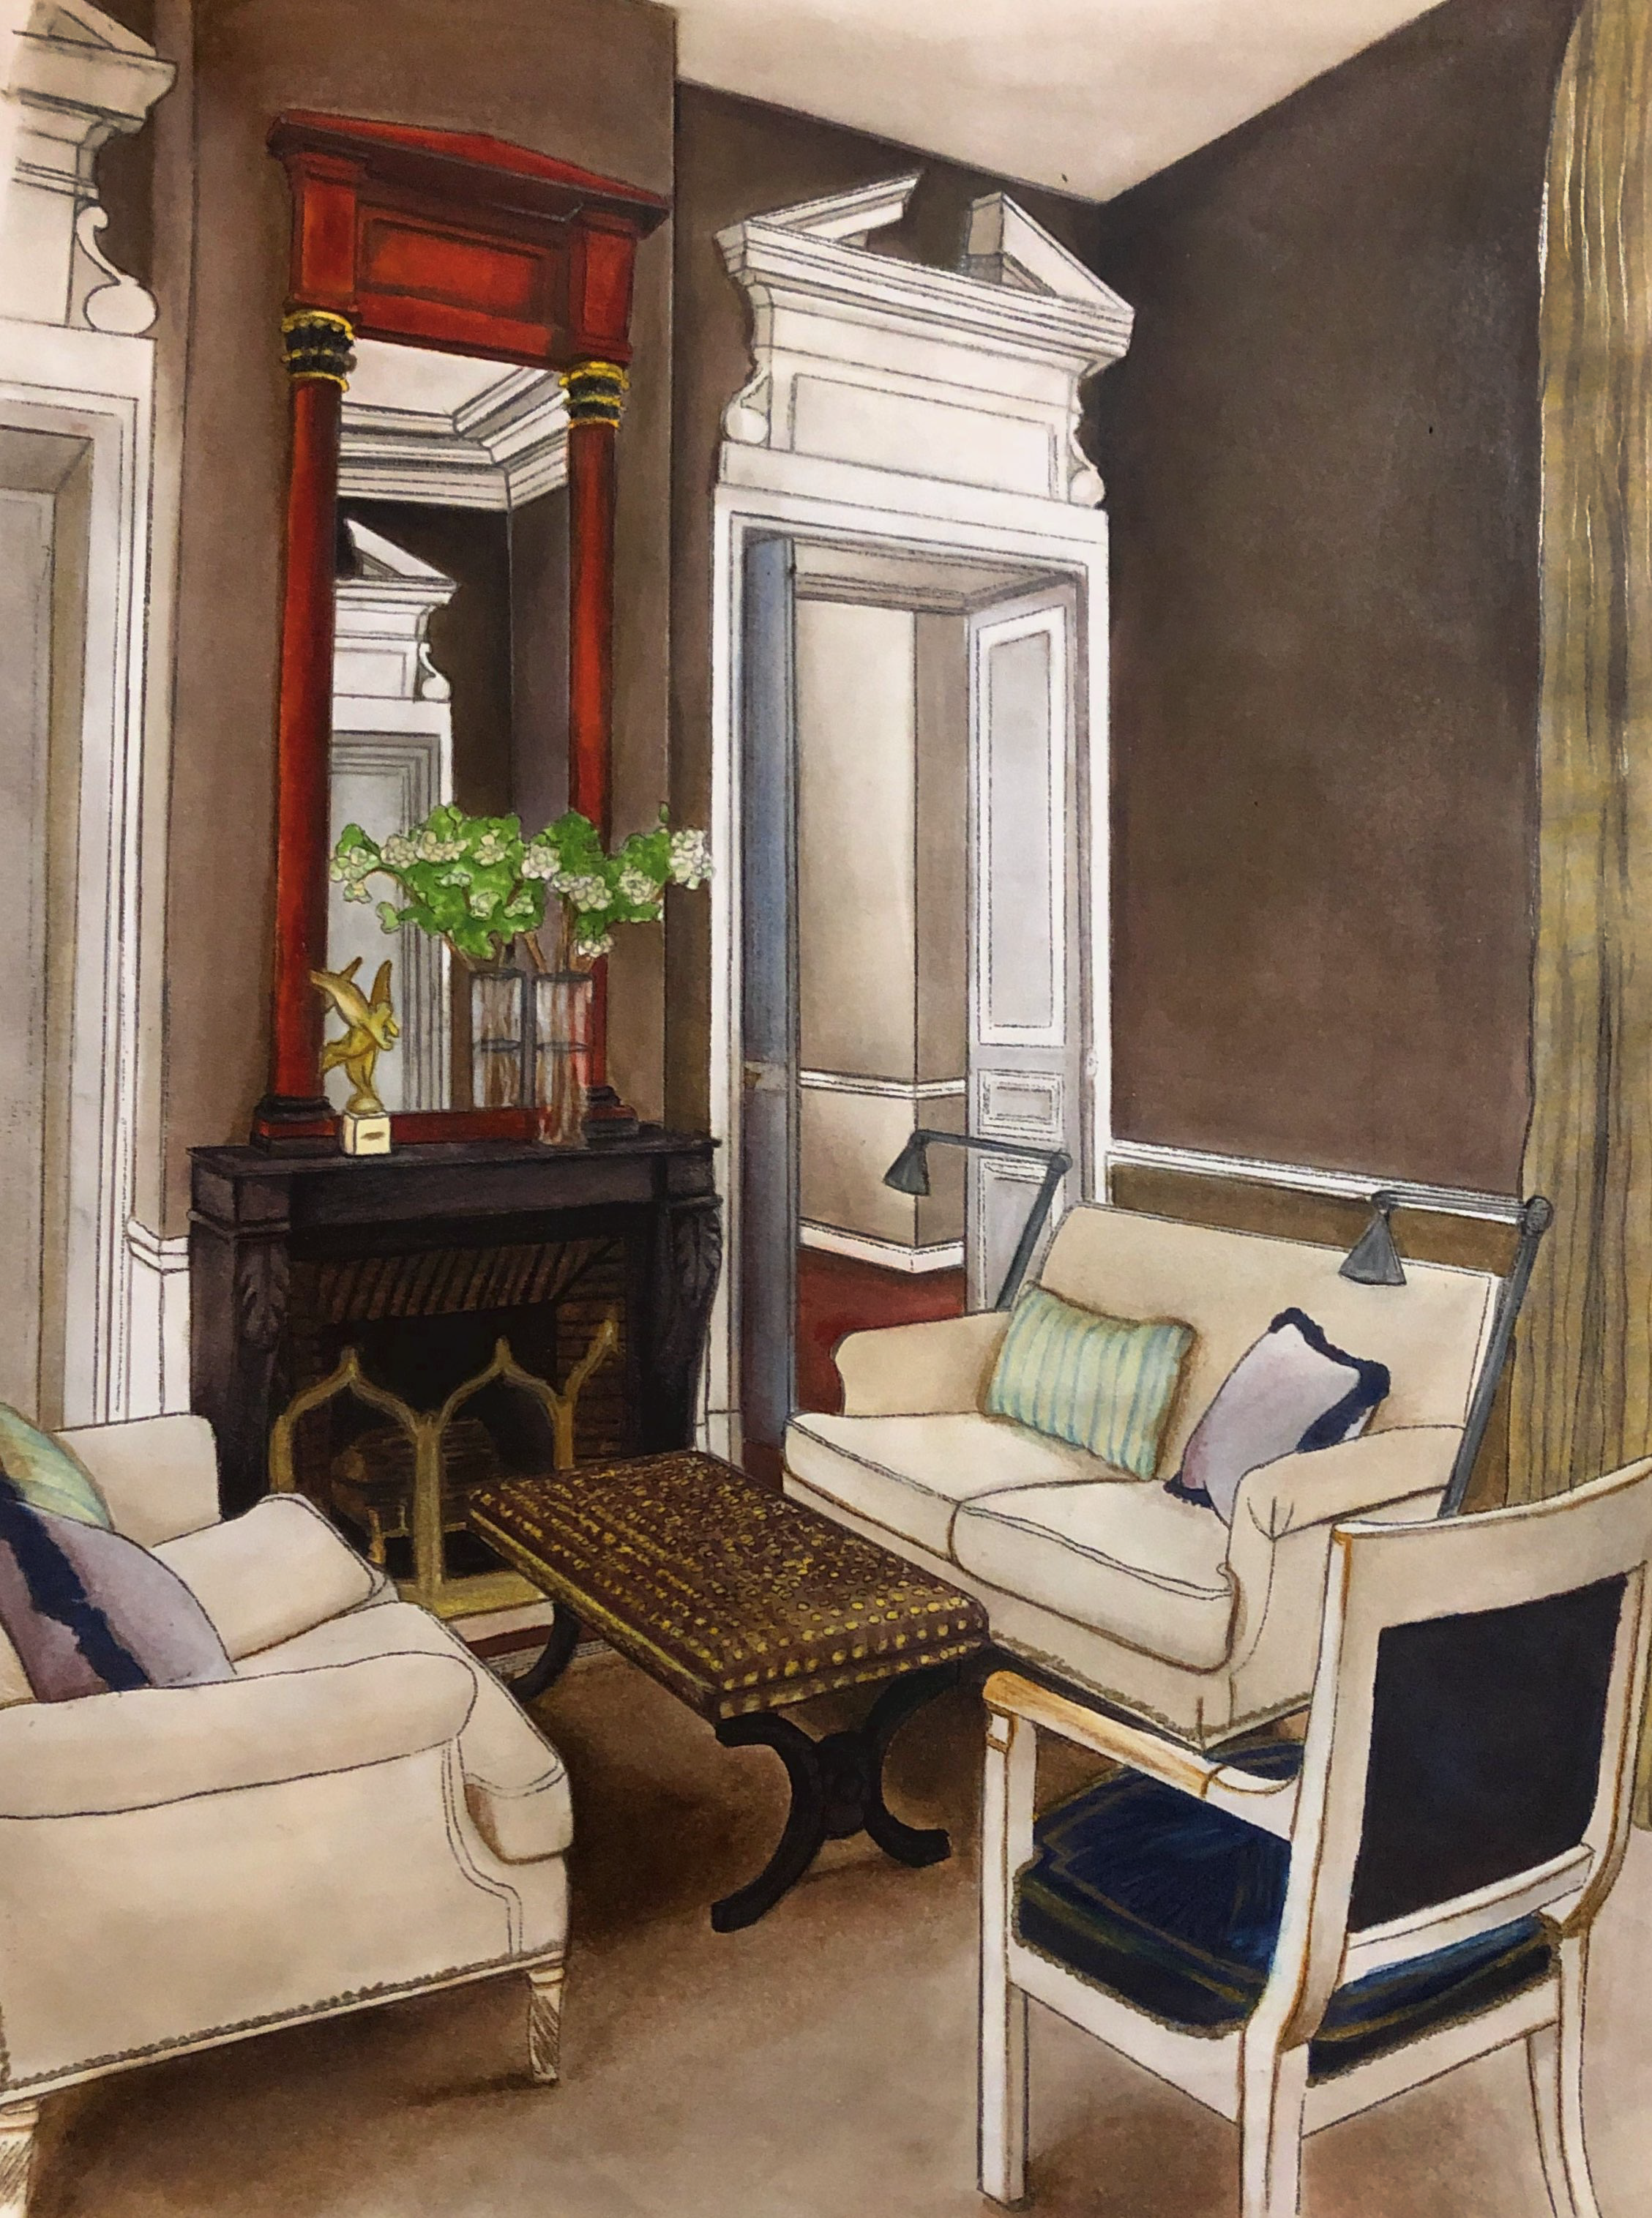 Hand rendering of a traditional living room with two sofas, an arm chair, and coffee table.